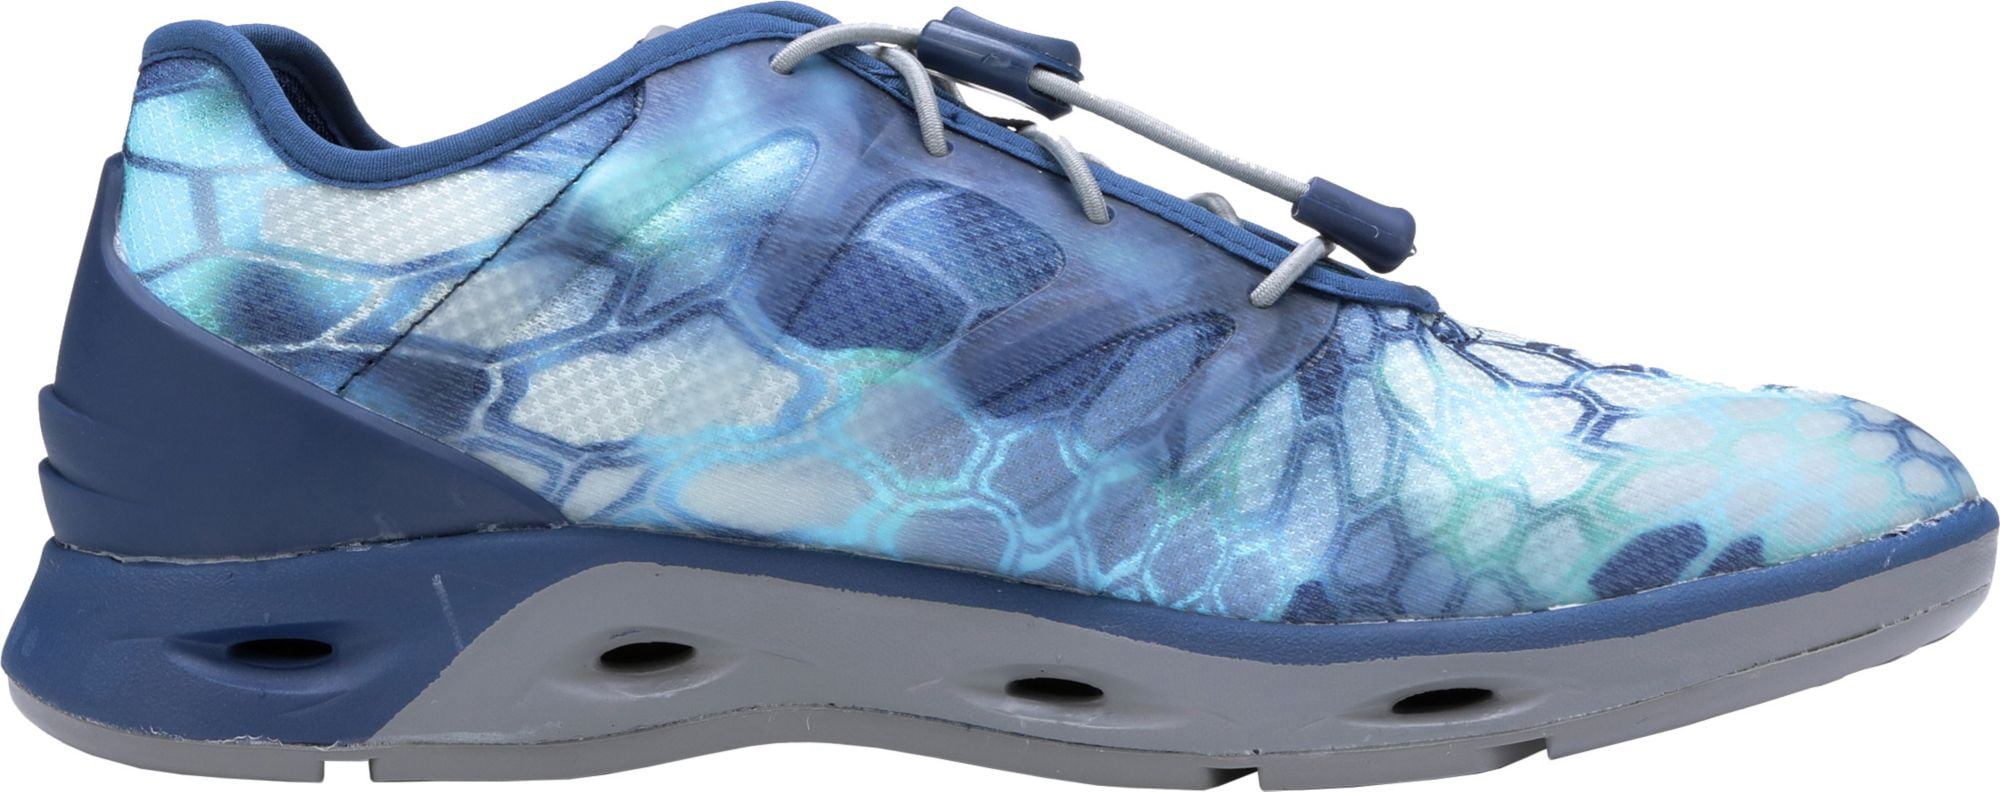 Xtratuf Men's Spindrift Water Shoes FREE SHIPPING WITHIN US! 